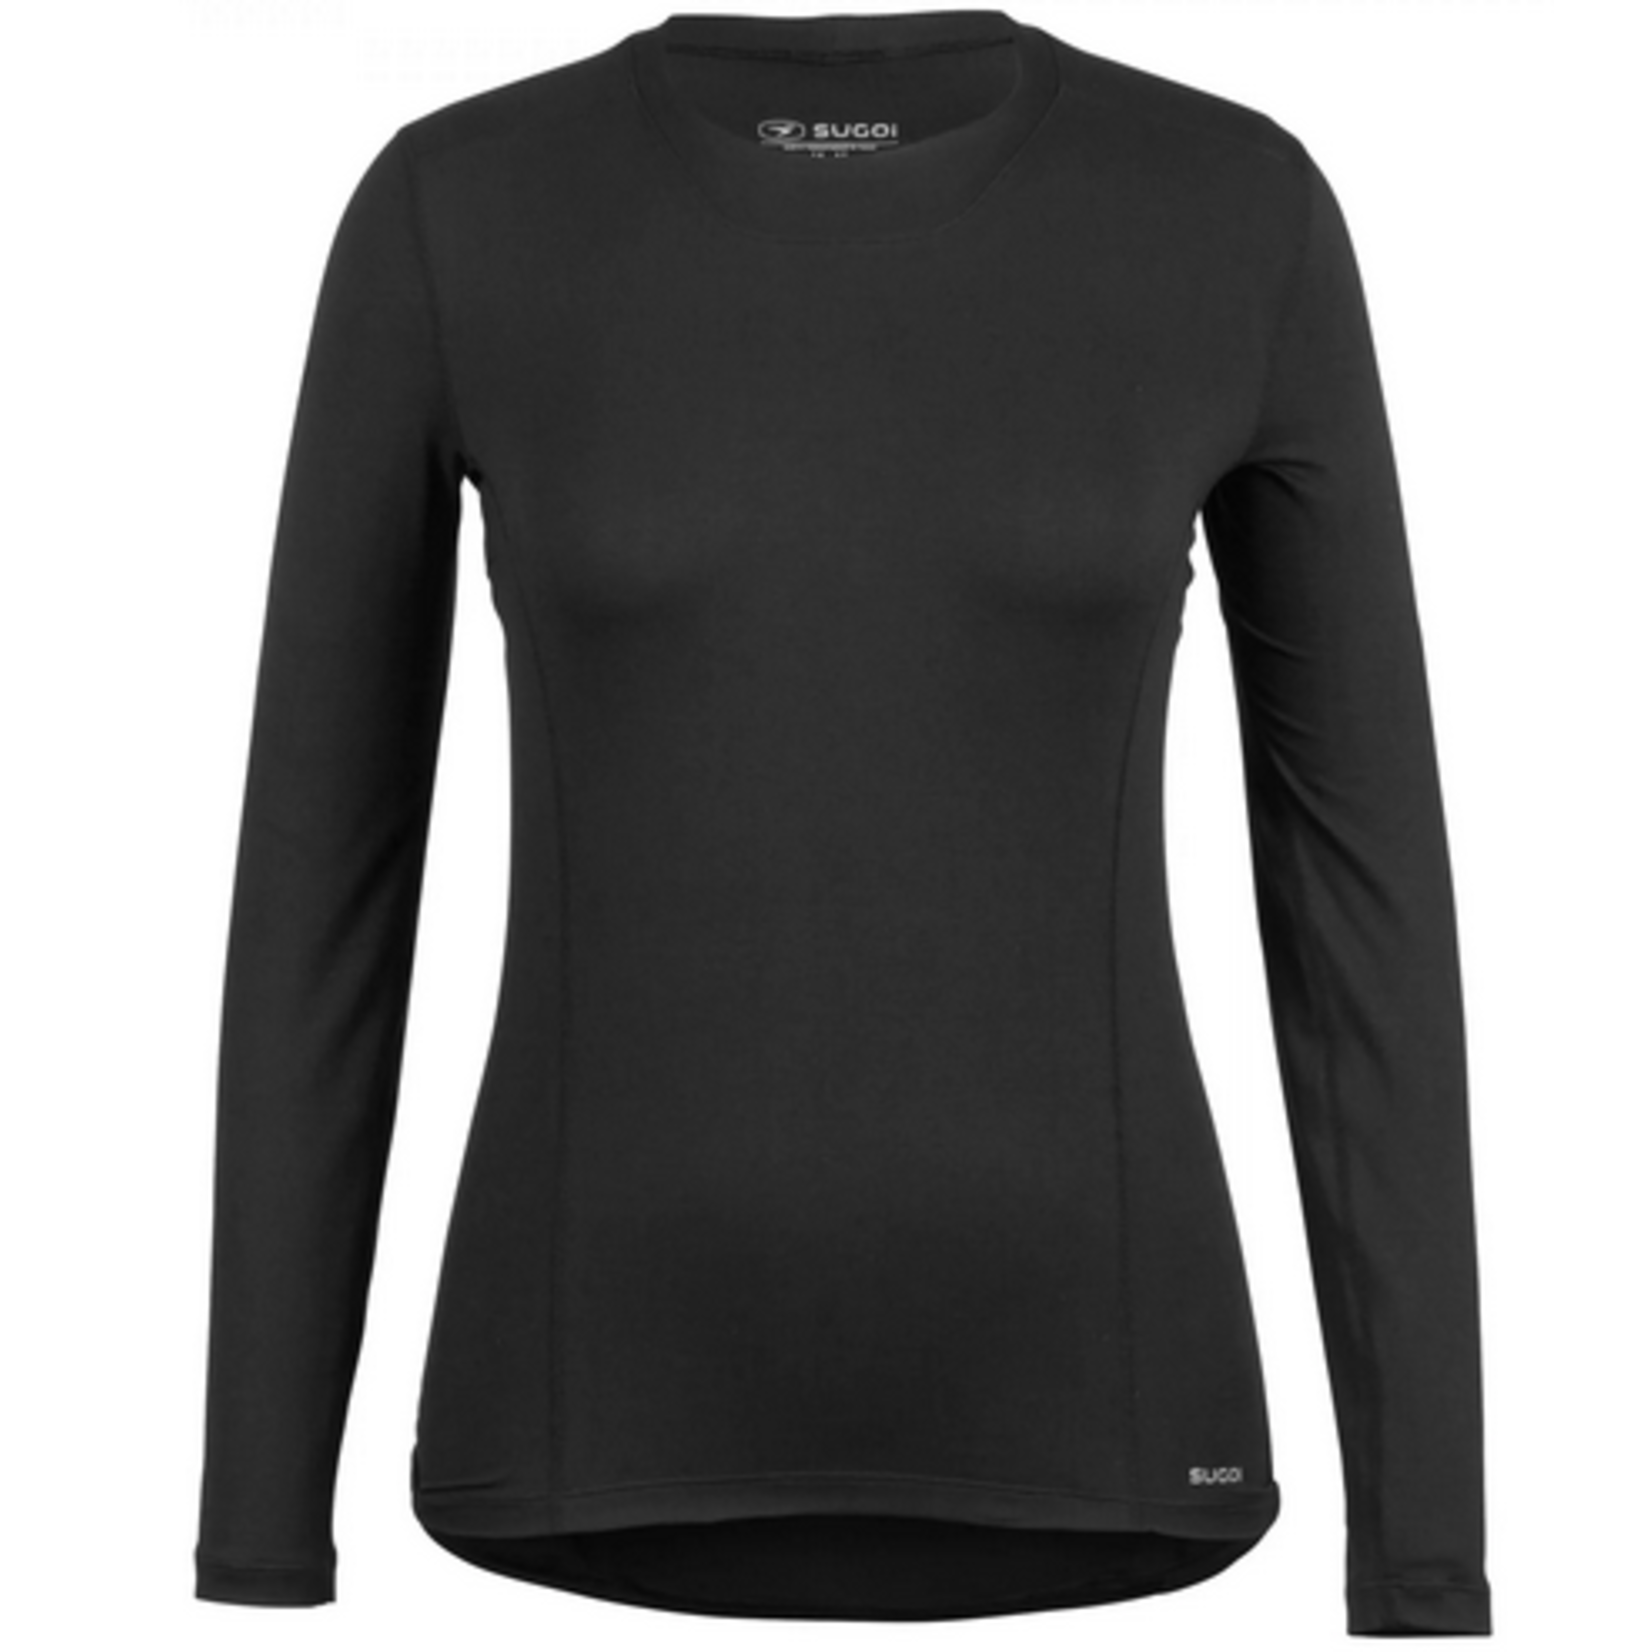 Sugoi Women's Thermal Base Layer